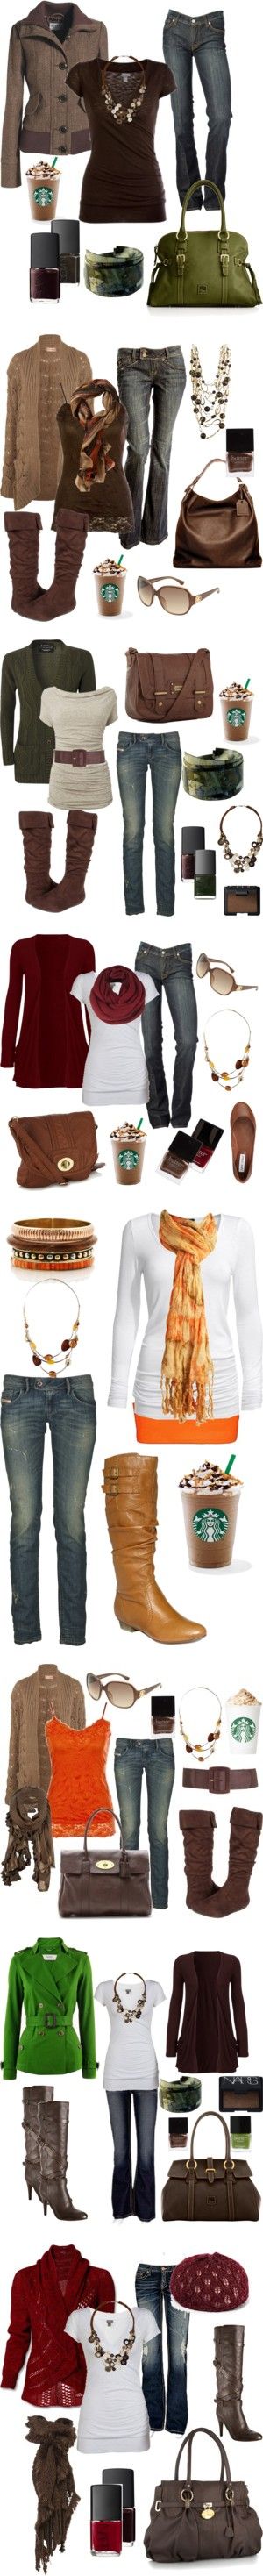 "Fall Outfits!" by chelseawate on Polyvore